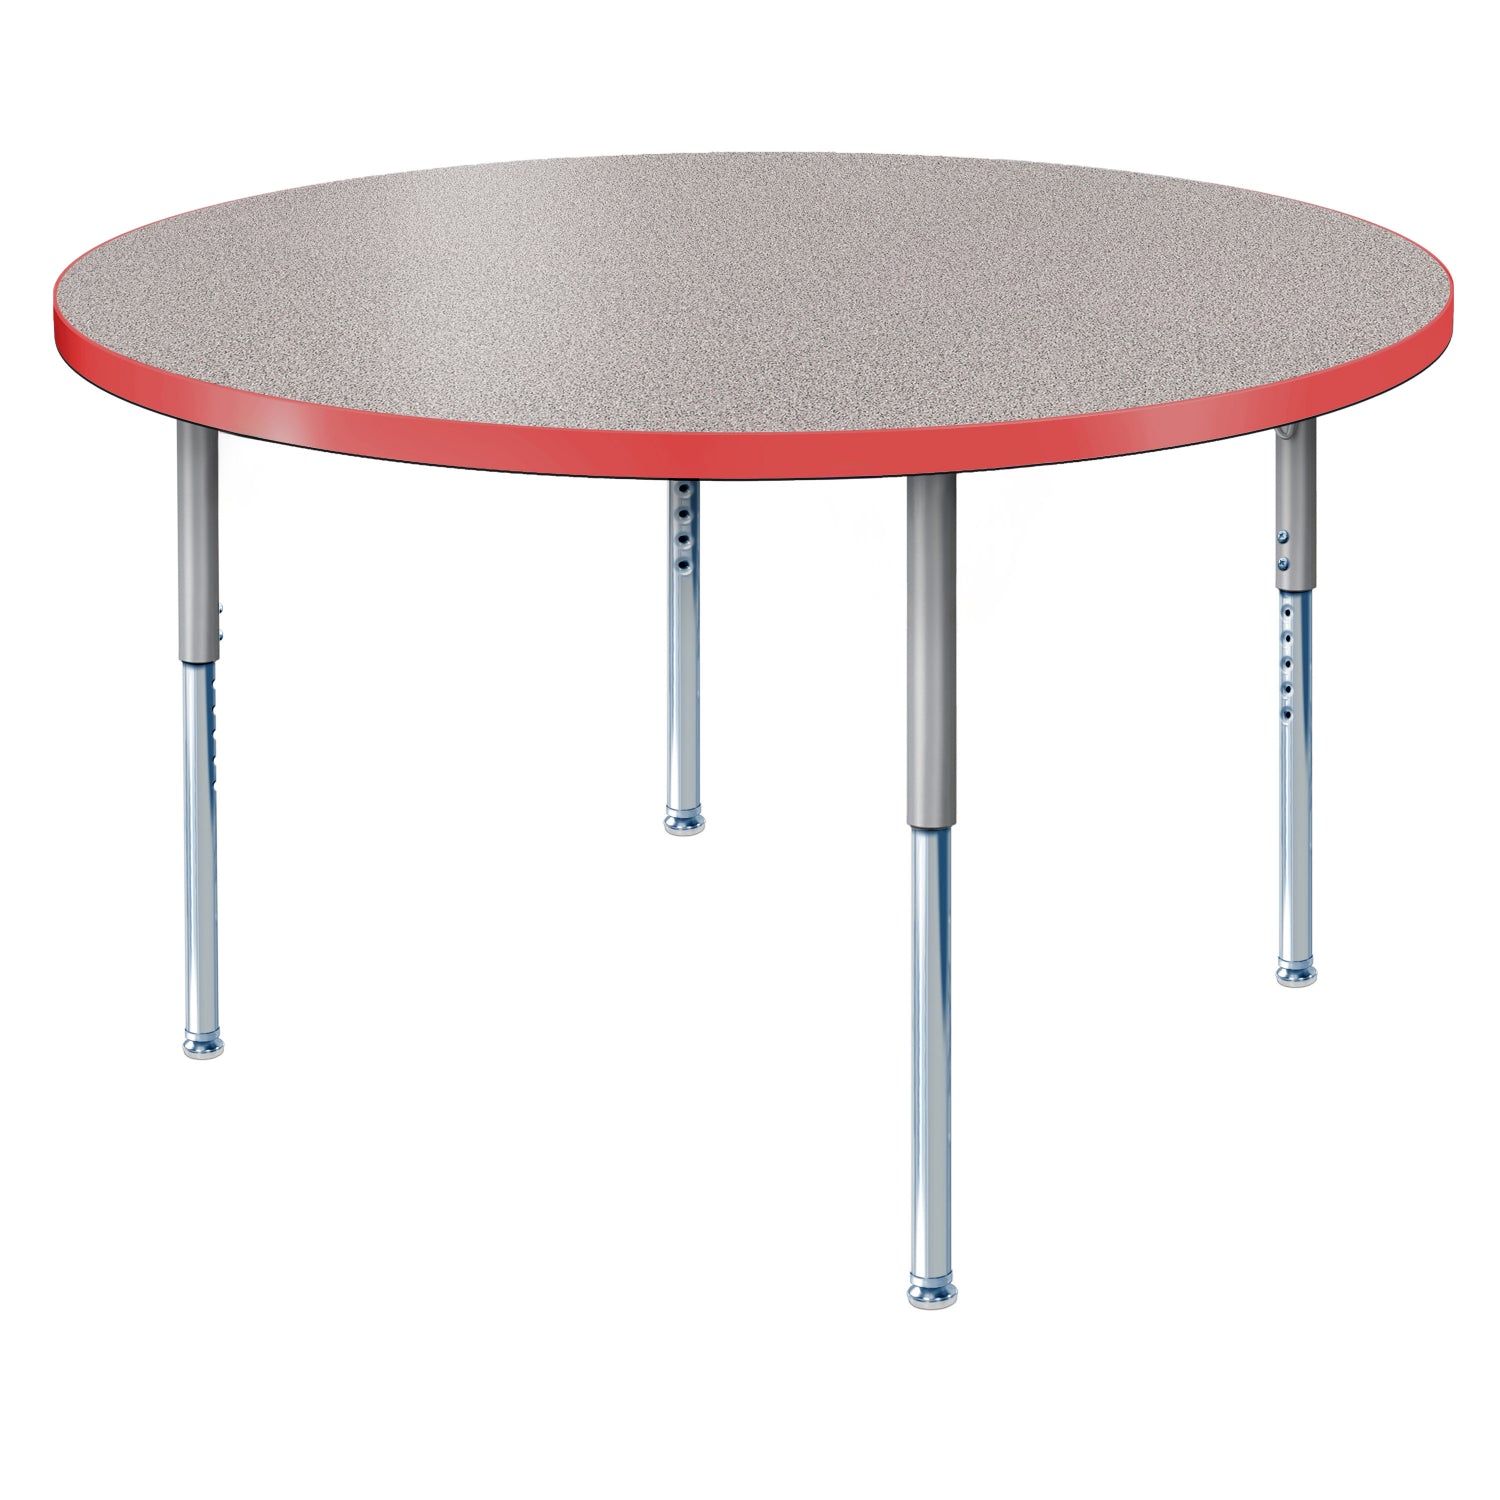 Modern Classic Series 42" Circle Activity Table with High Pressure Laminate Top, Adjustable Height Legs